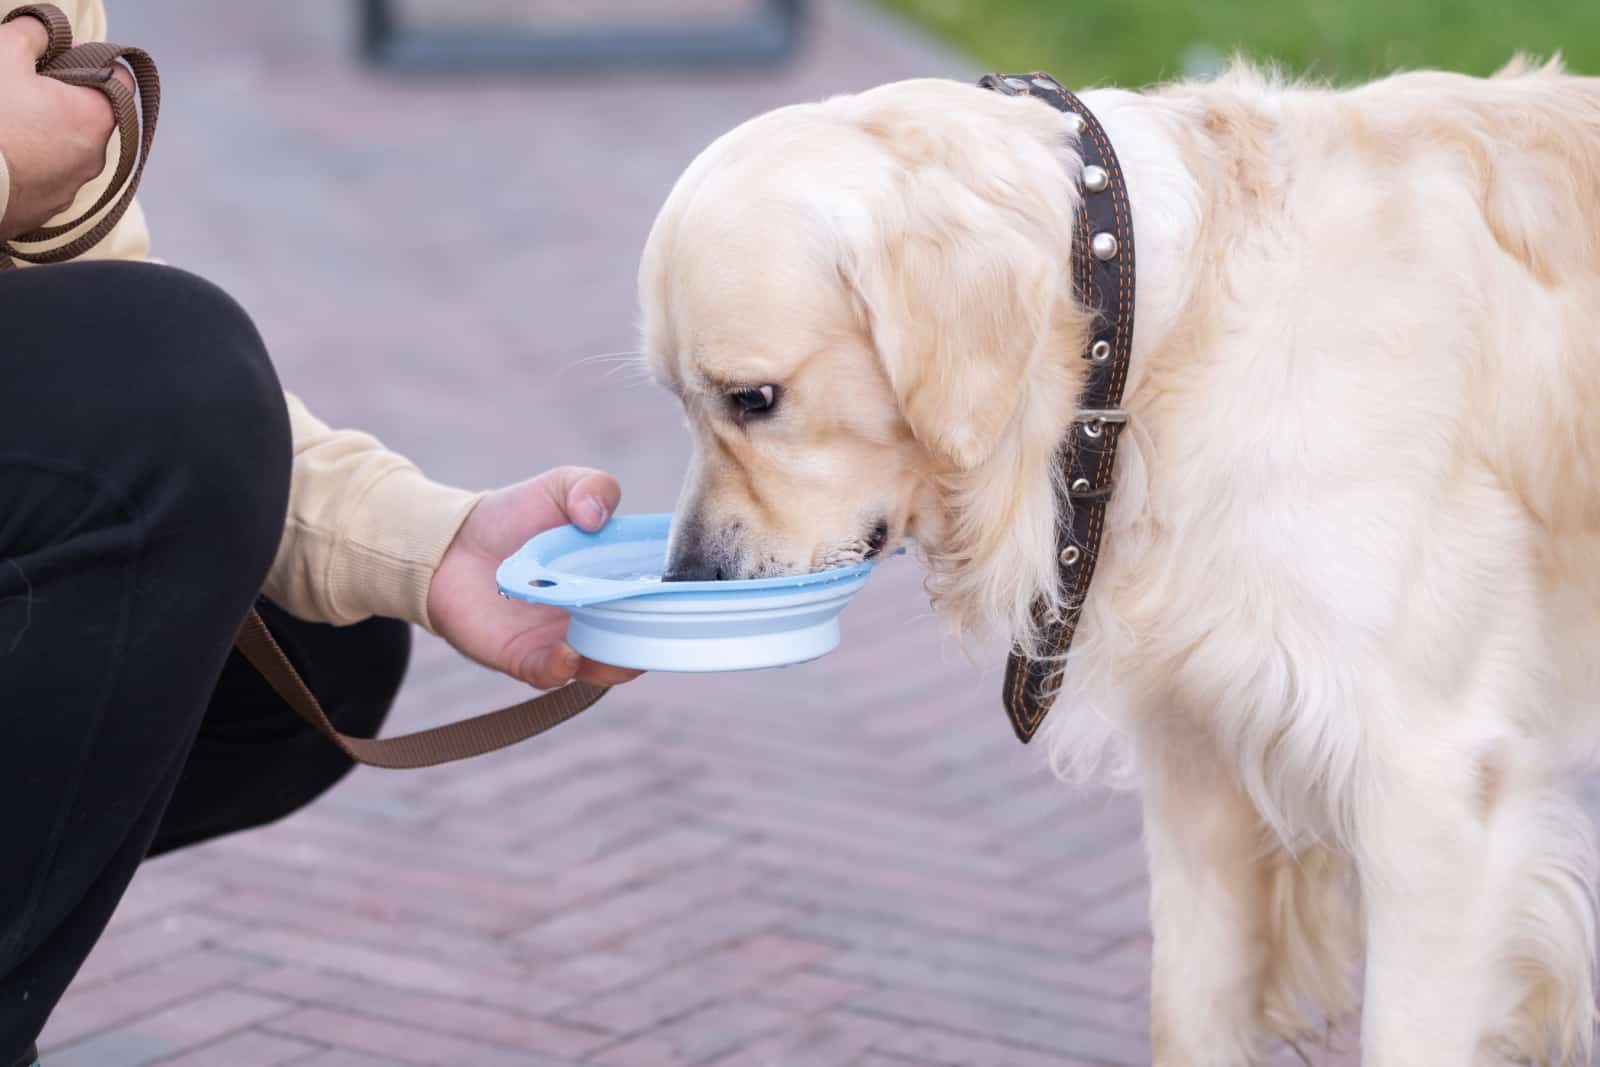 A man gives a dog a bowl of water in the park.